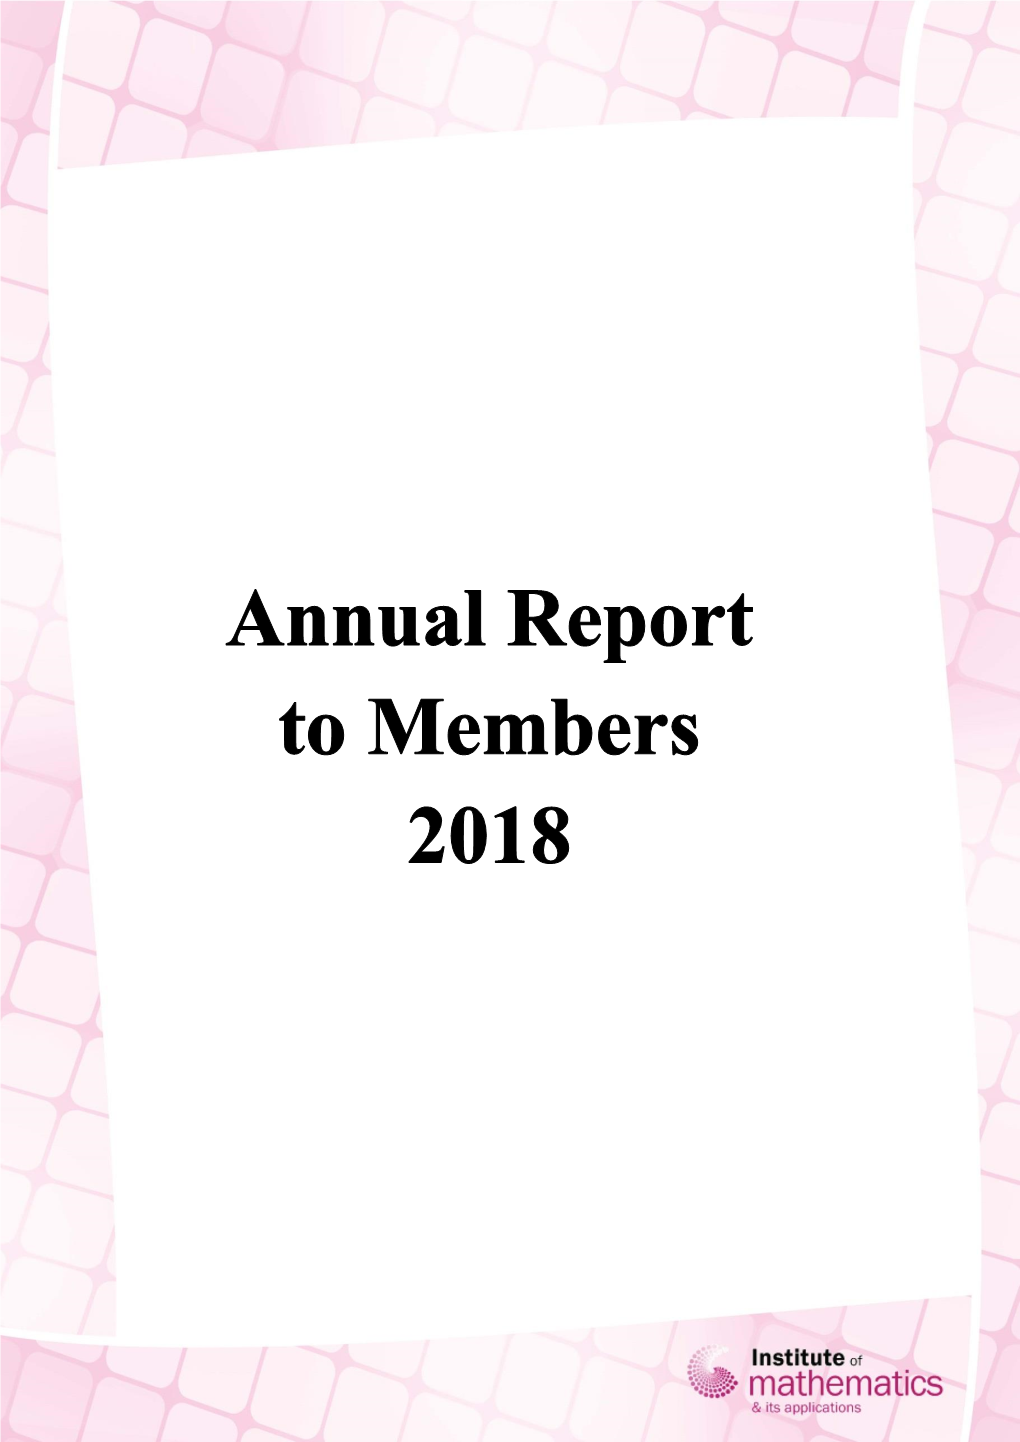 Annual Report to Members 2018